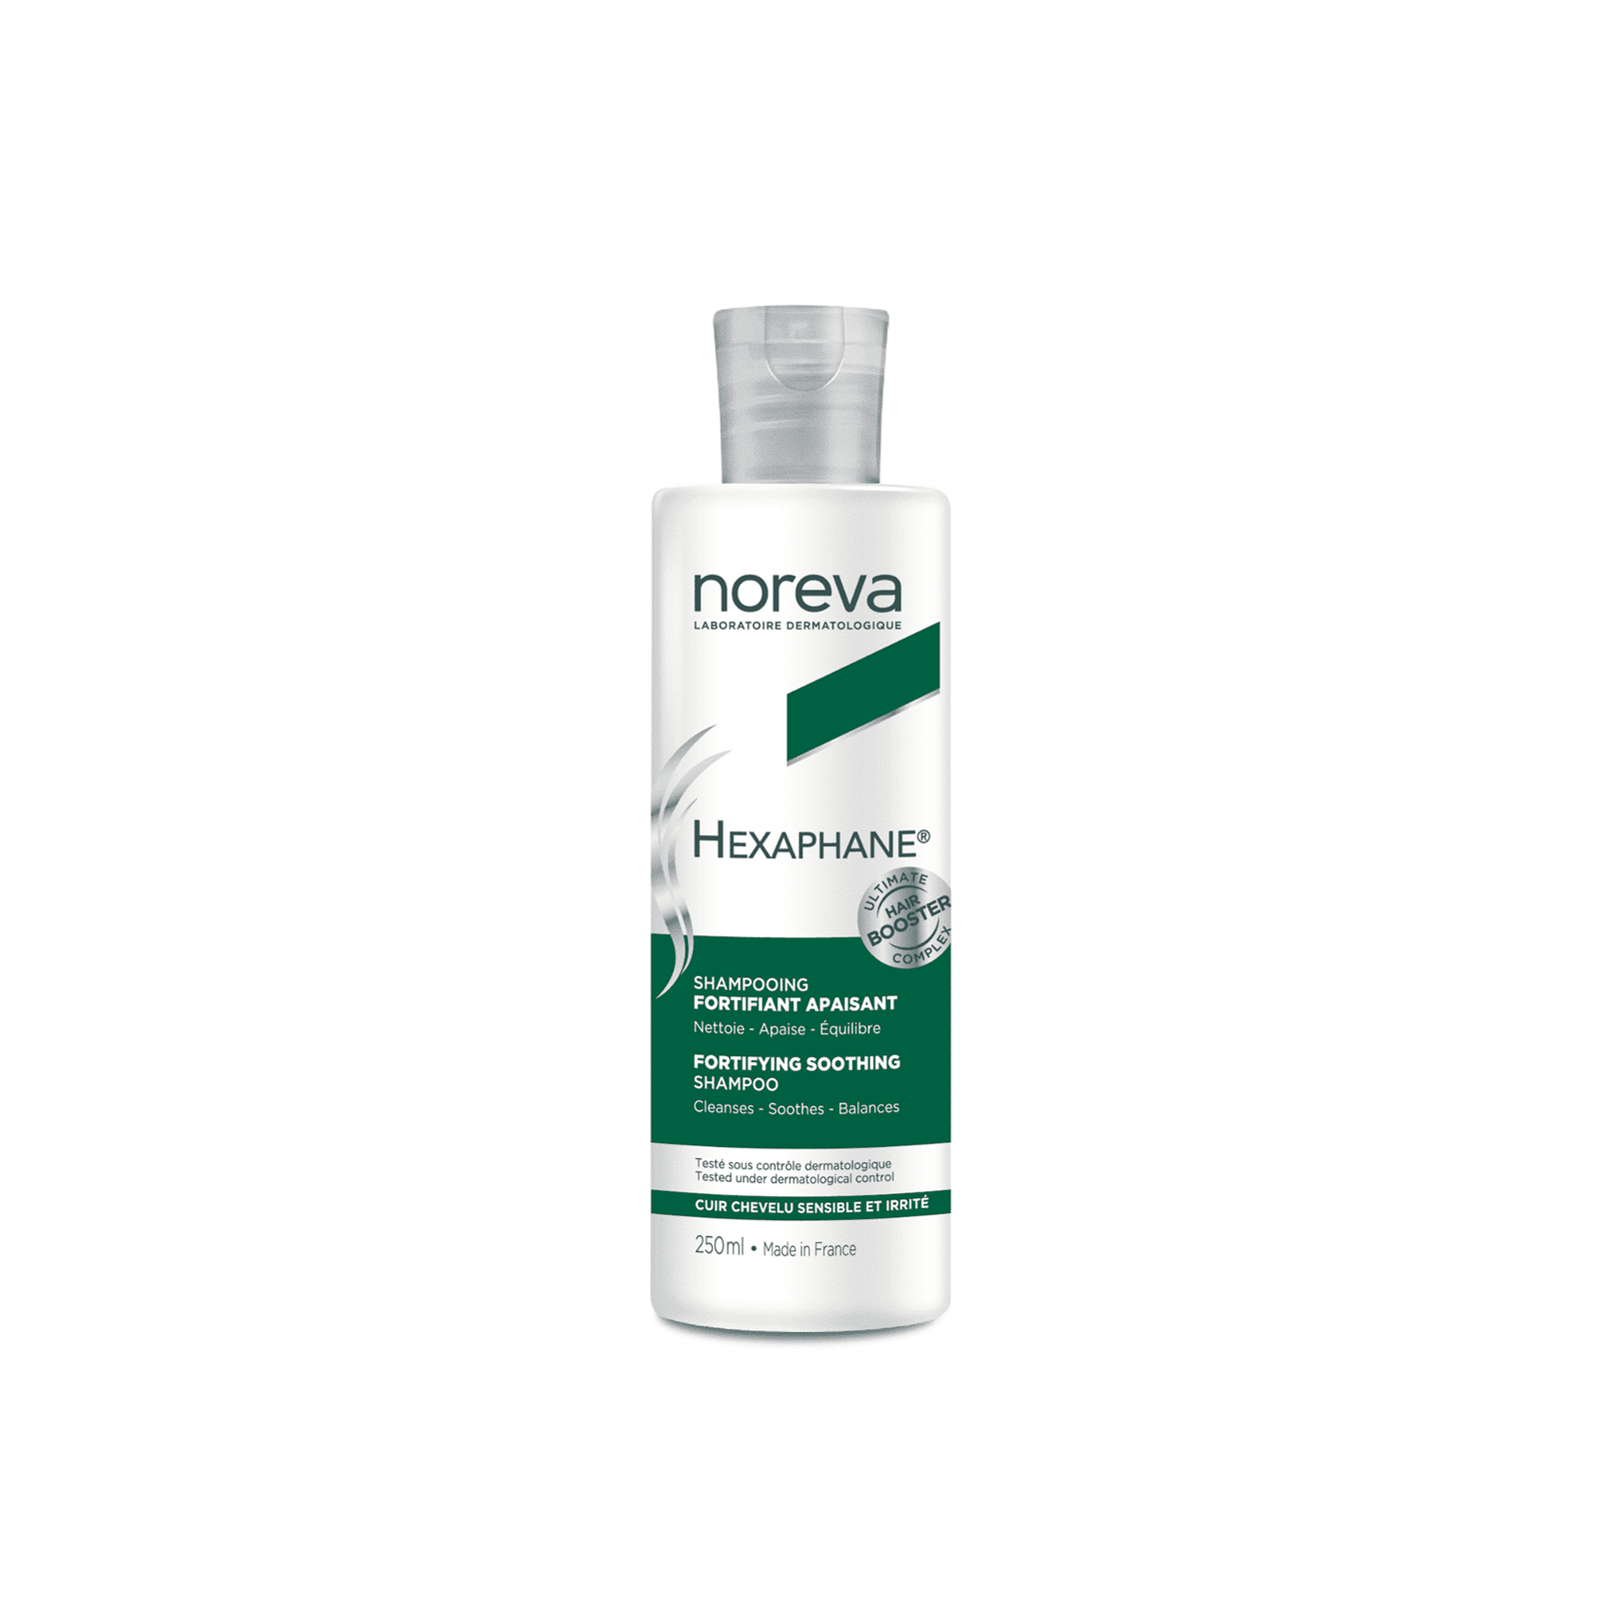 Noreva Hexaphane Fortifying Soothing Shampoo